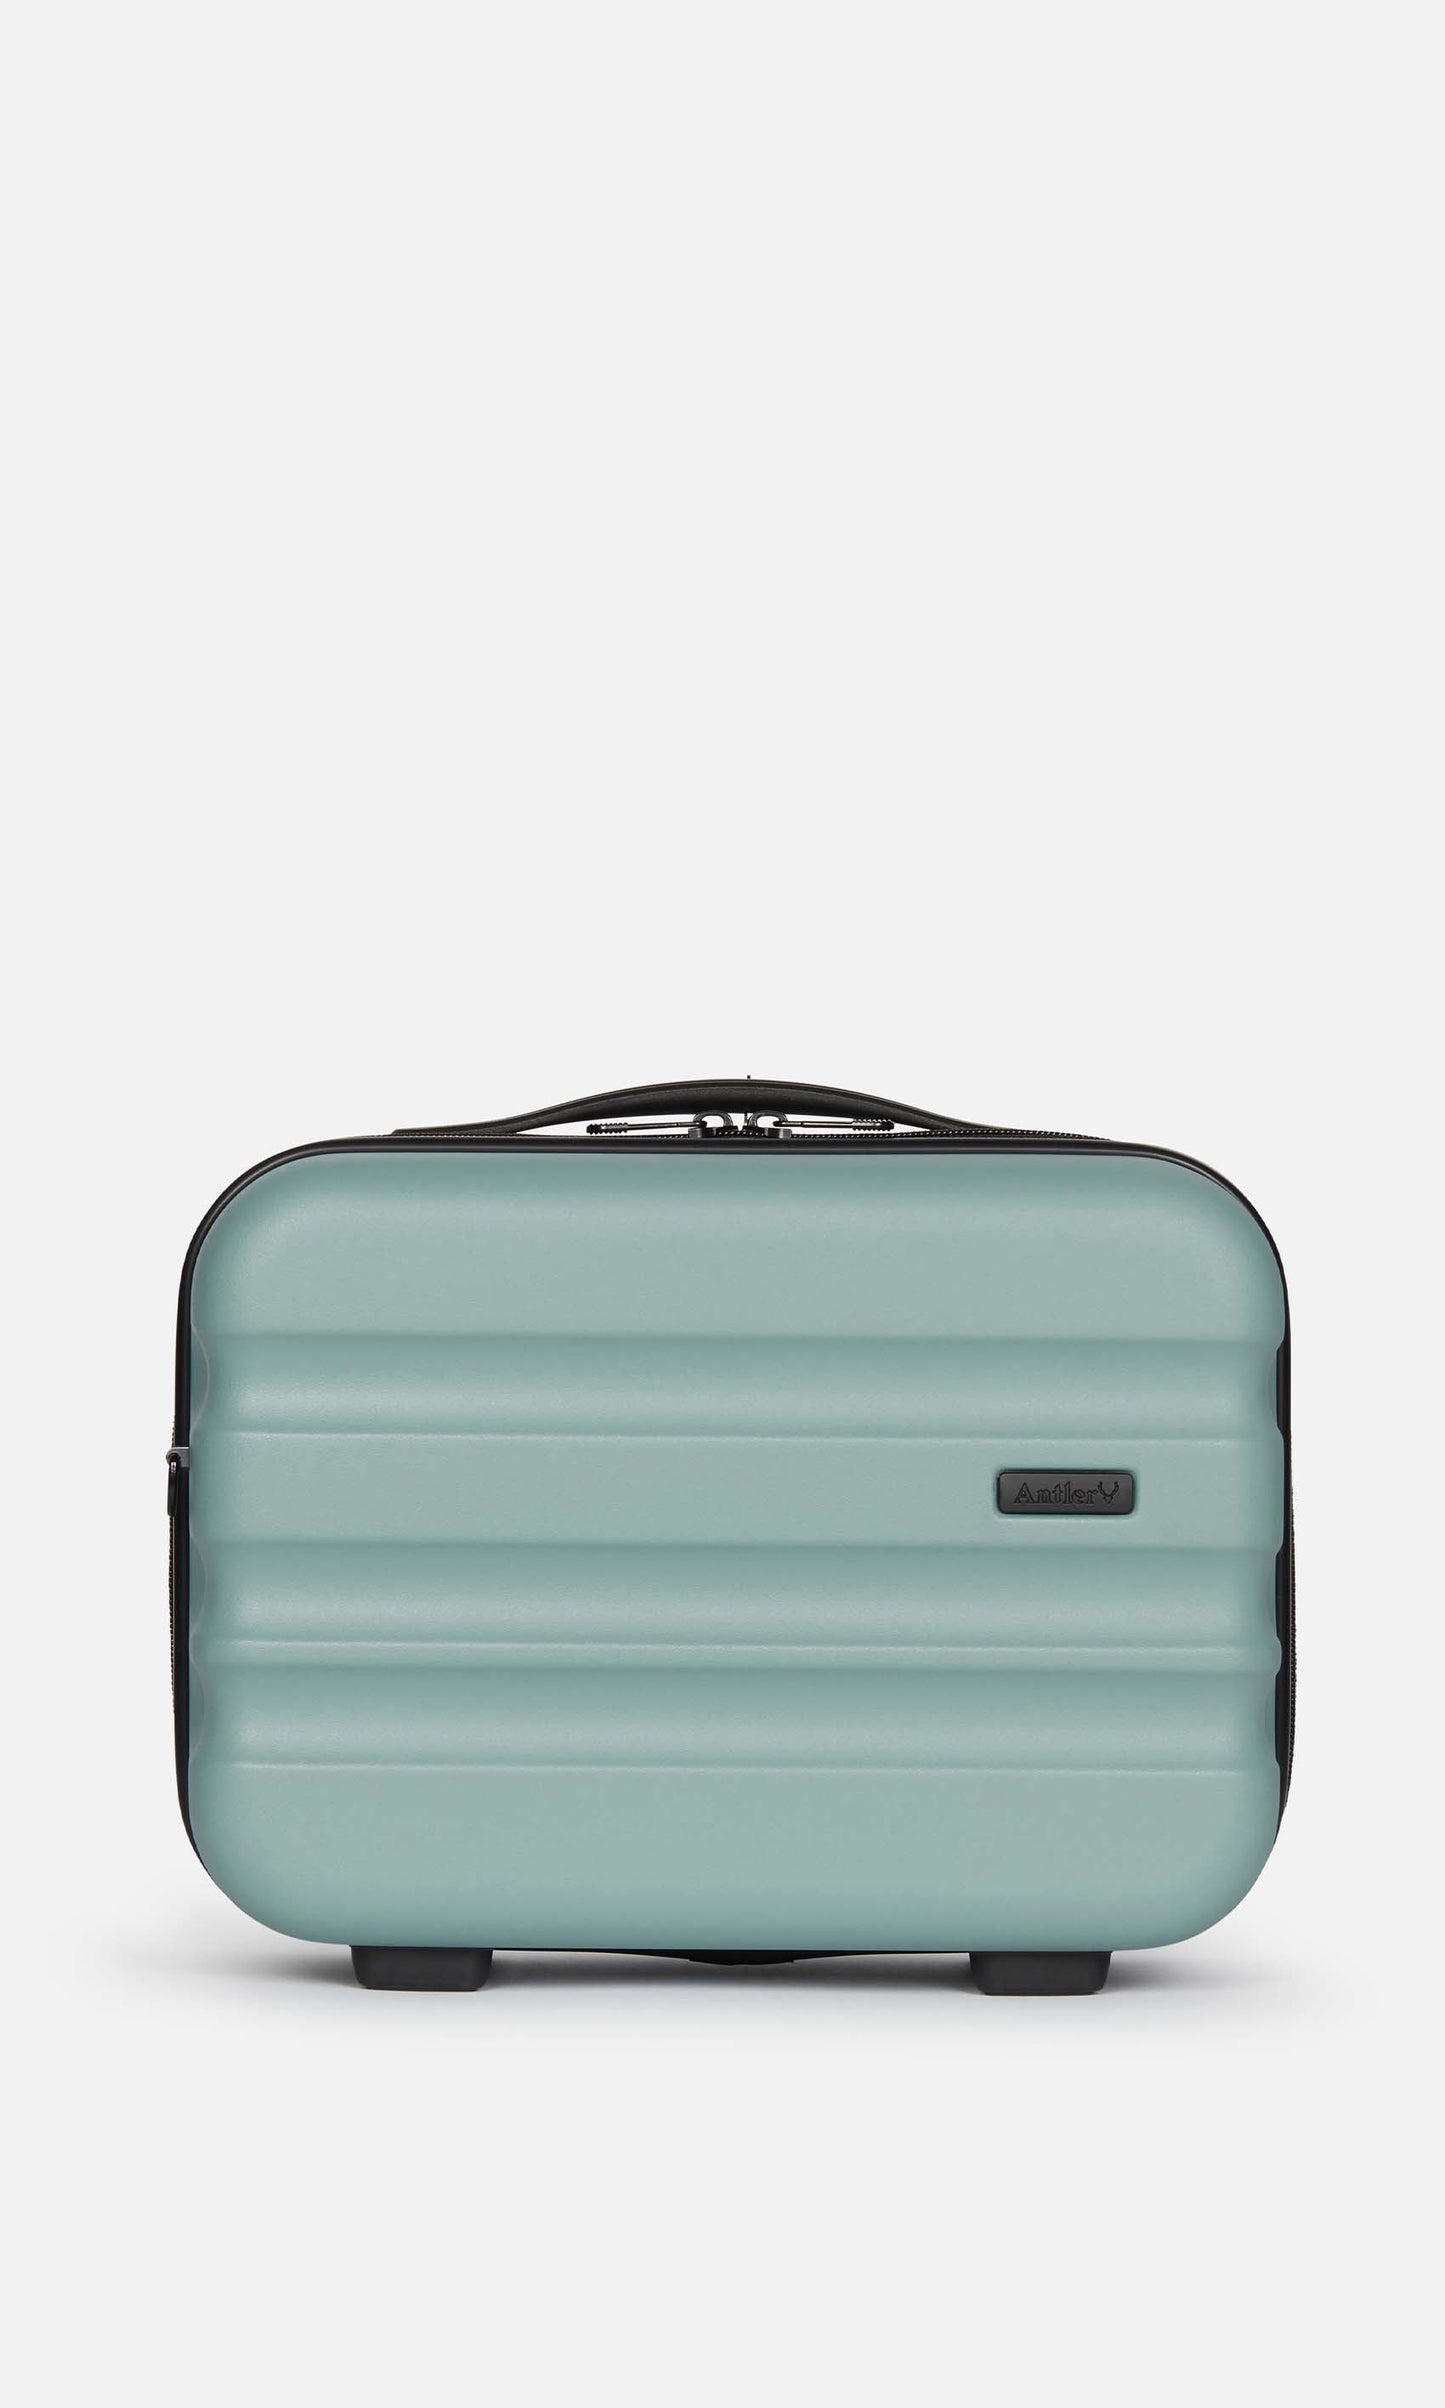 Antler Luggage -  Clifton vanity case in mineral - Hard Suitcases Clifton Vanity Case Mineral (Blue) | Travel Accessories & Gifts | Antler 